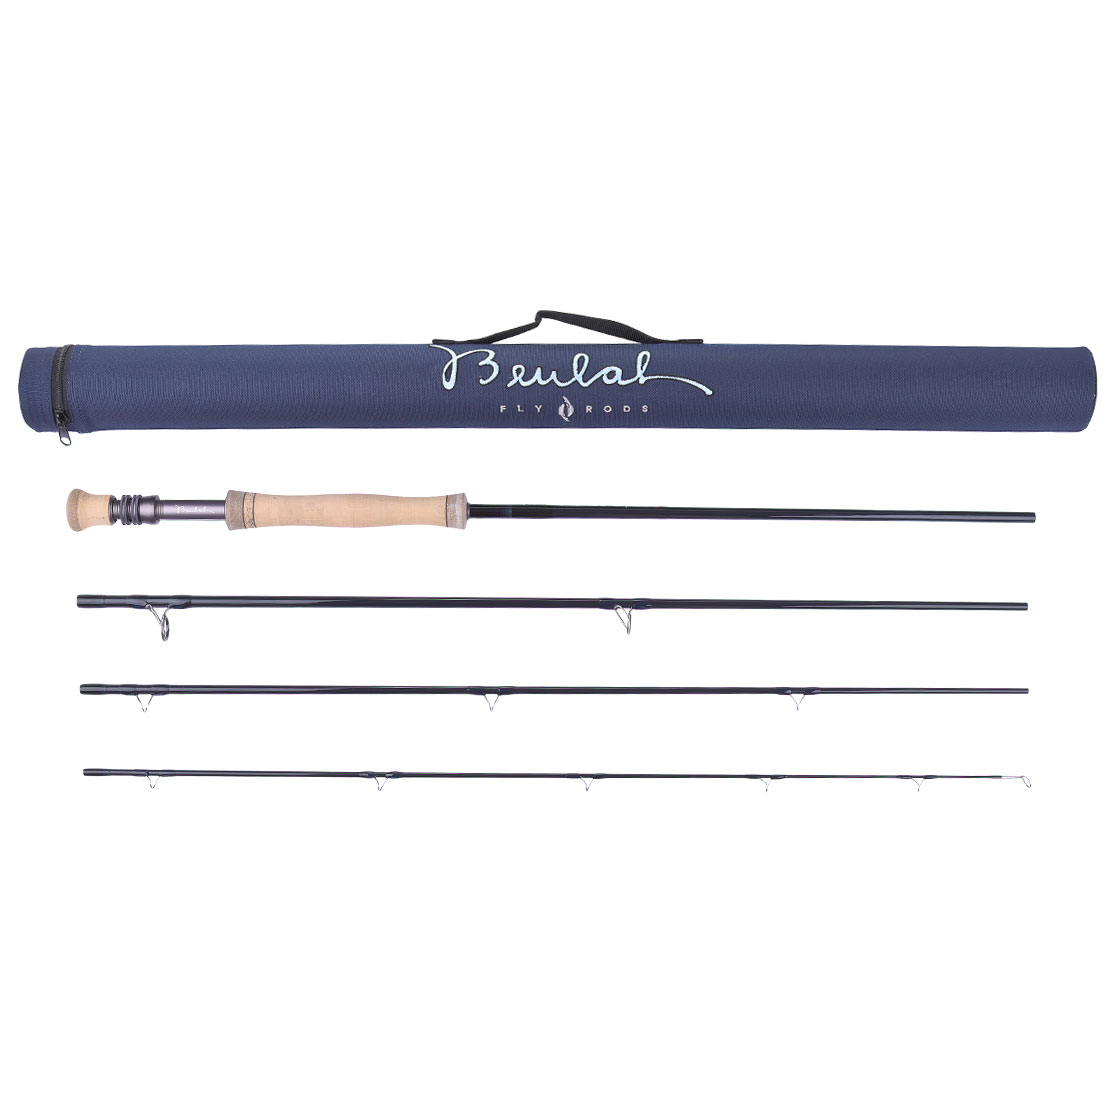 Beulah G2 Opal Saltwater Fly Rod, Single-handed, Fly Rods